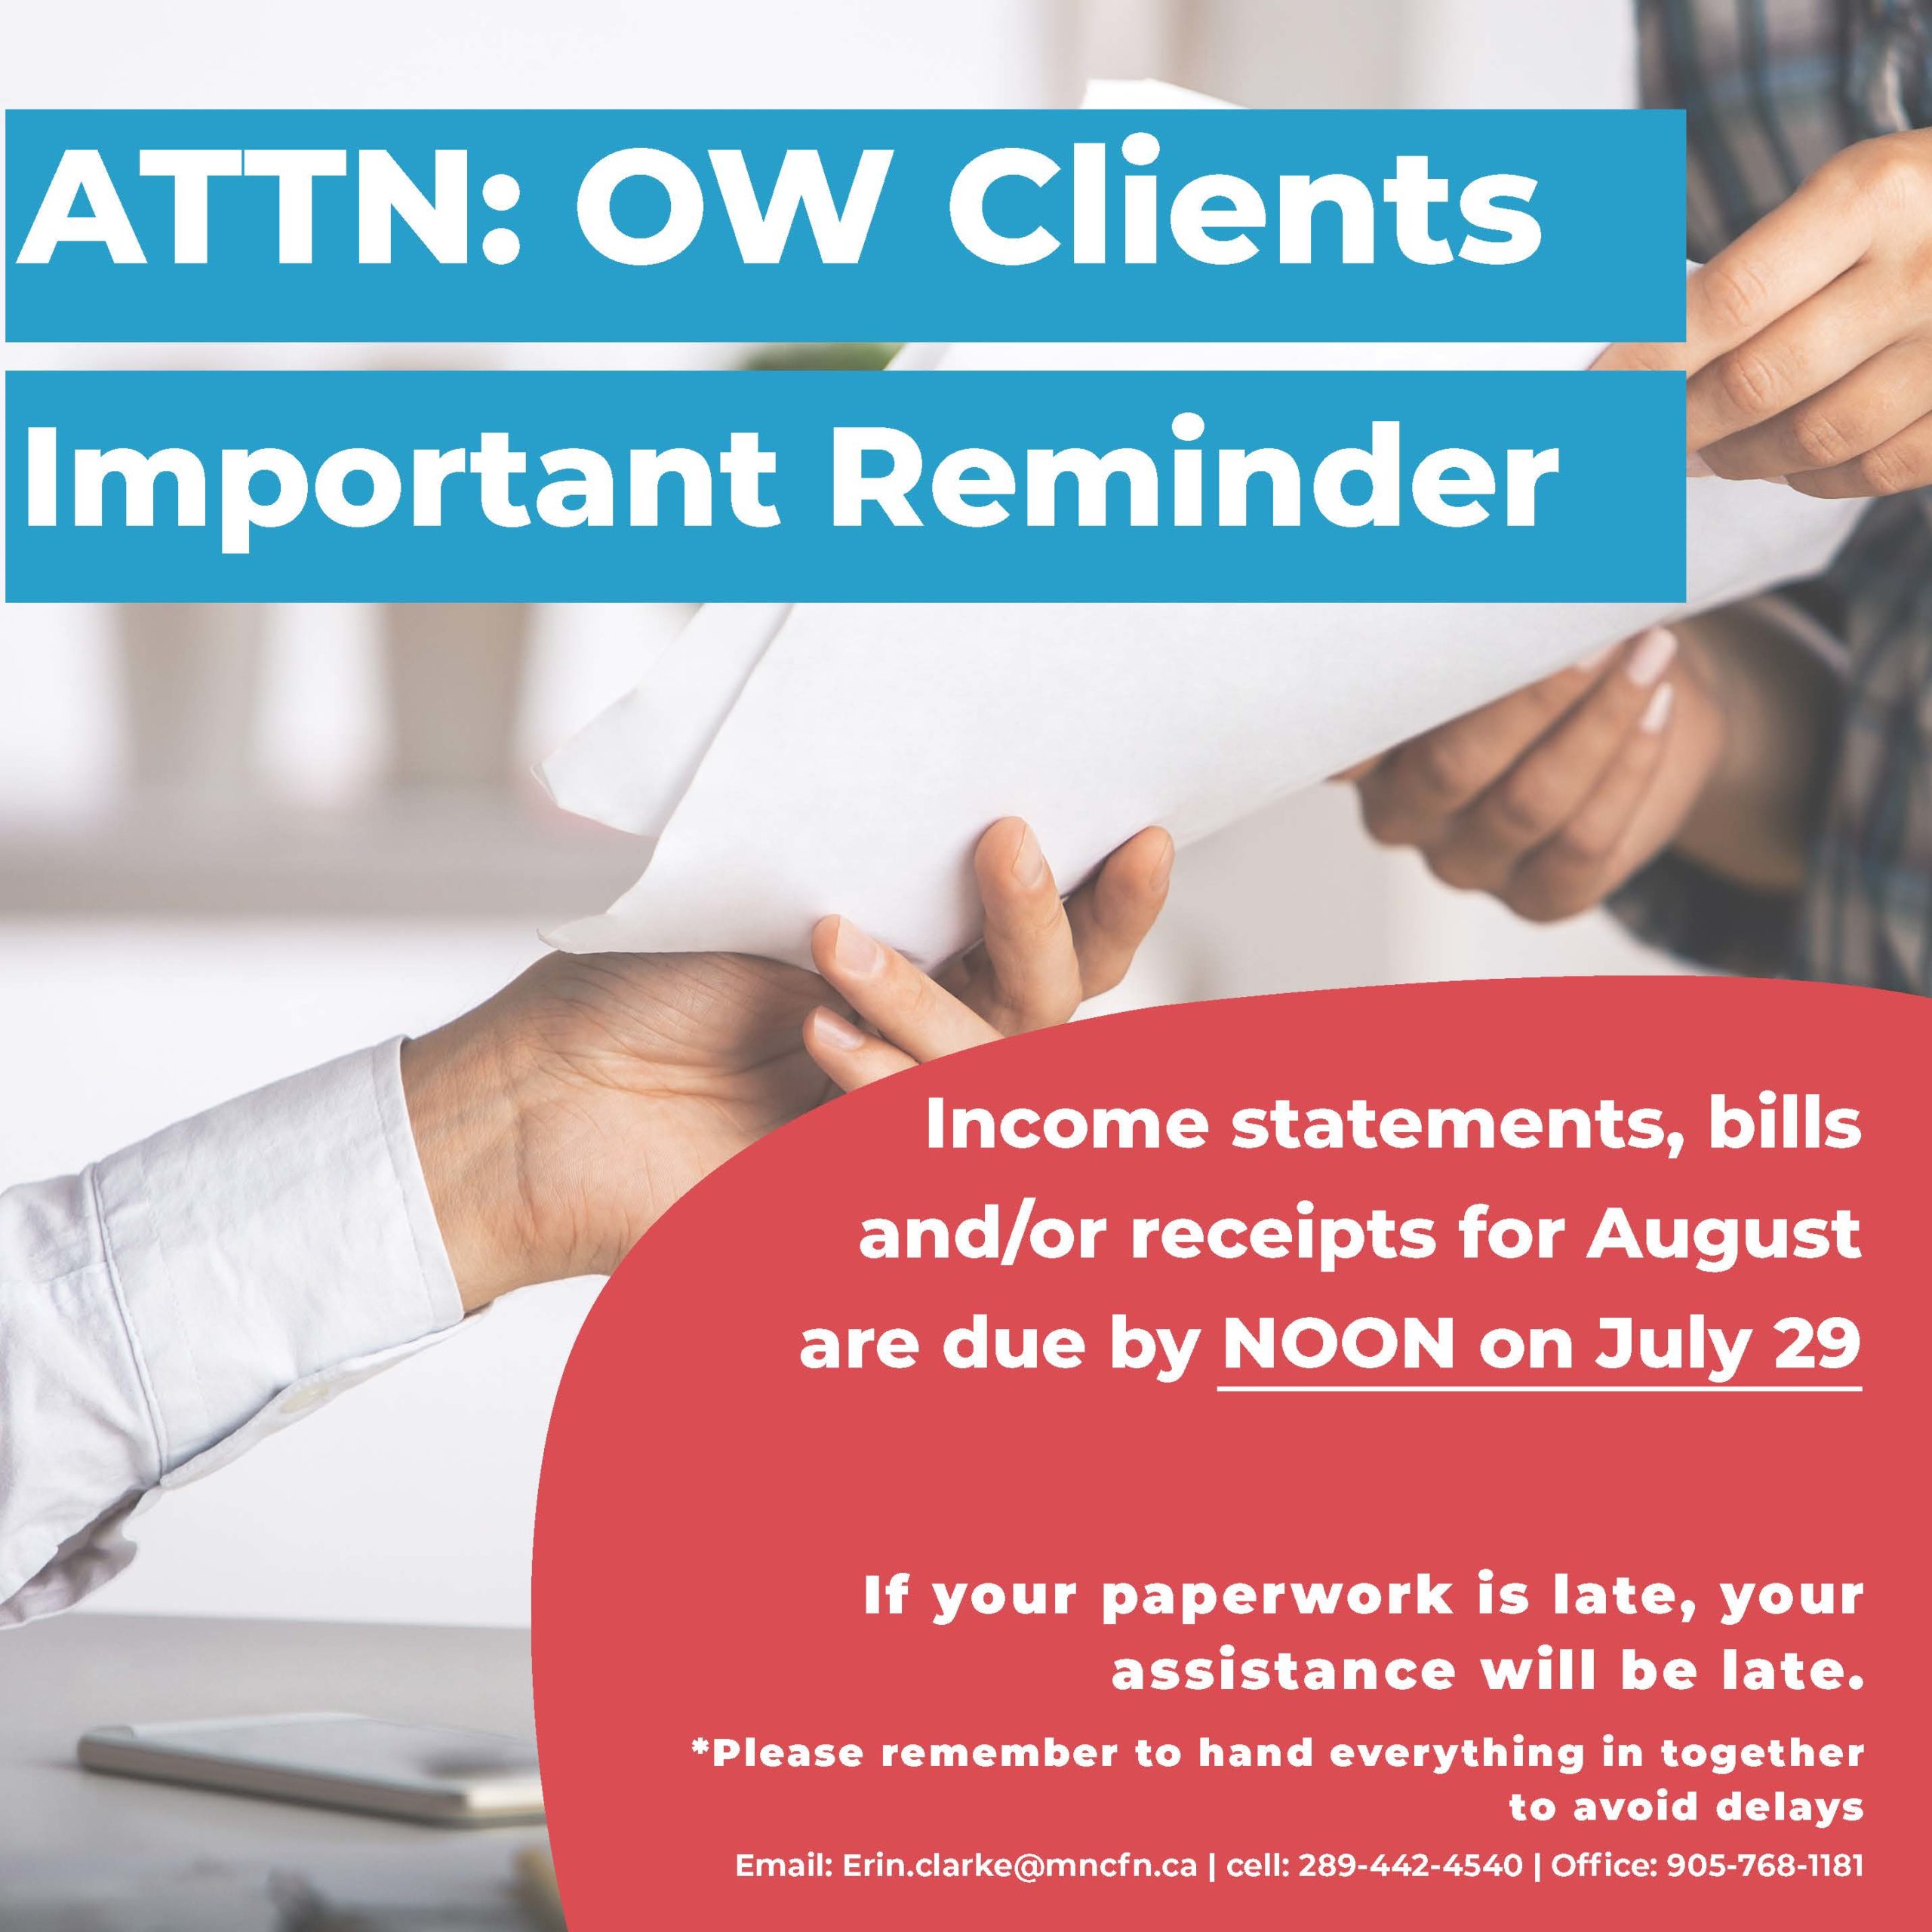 August reminder for OW Clients